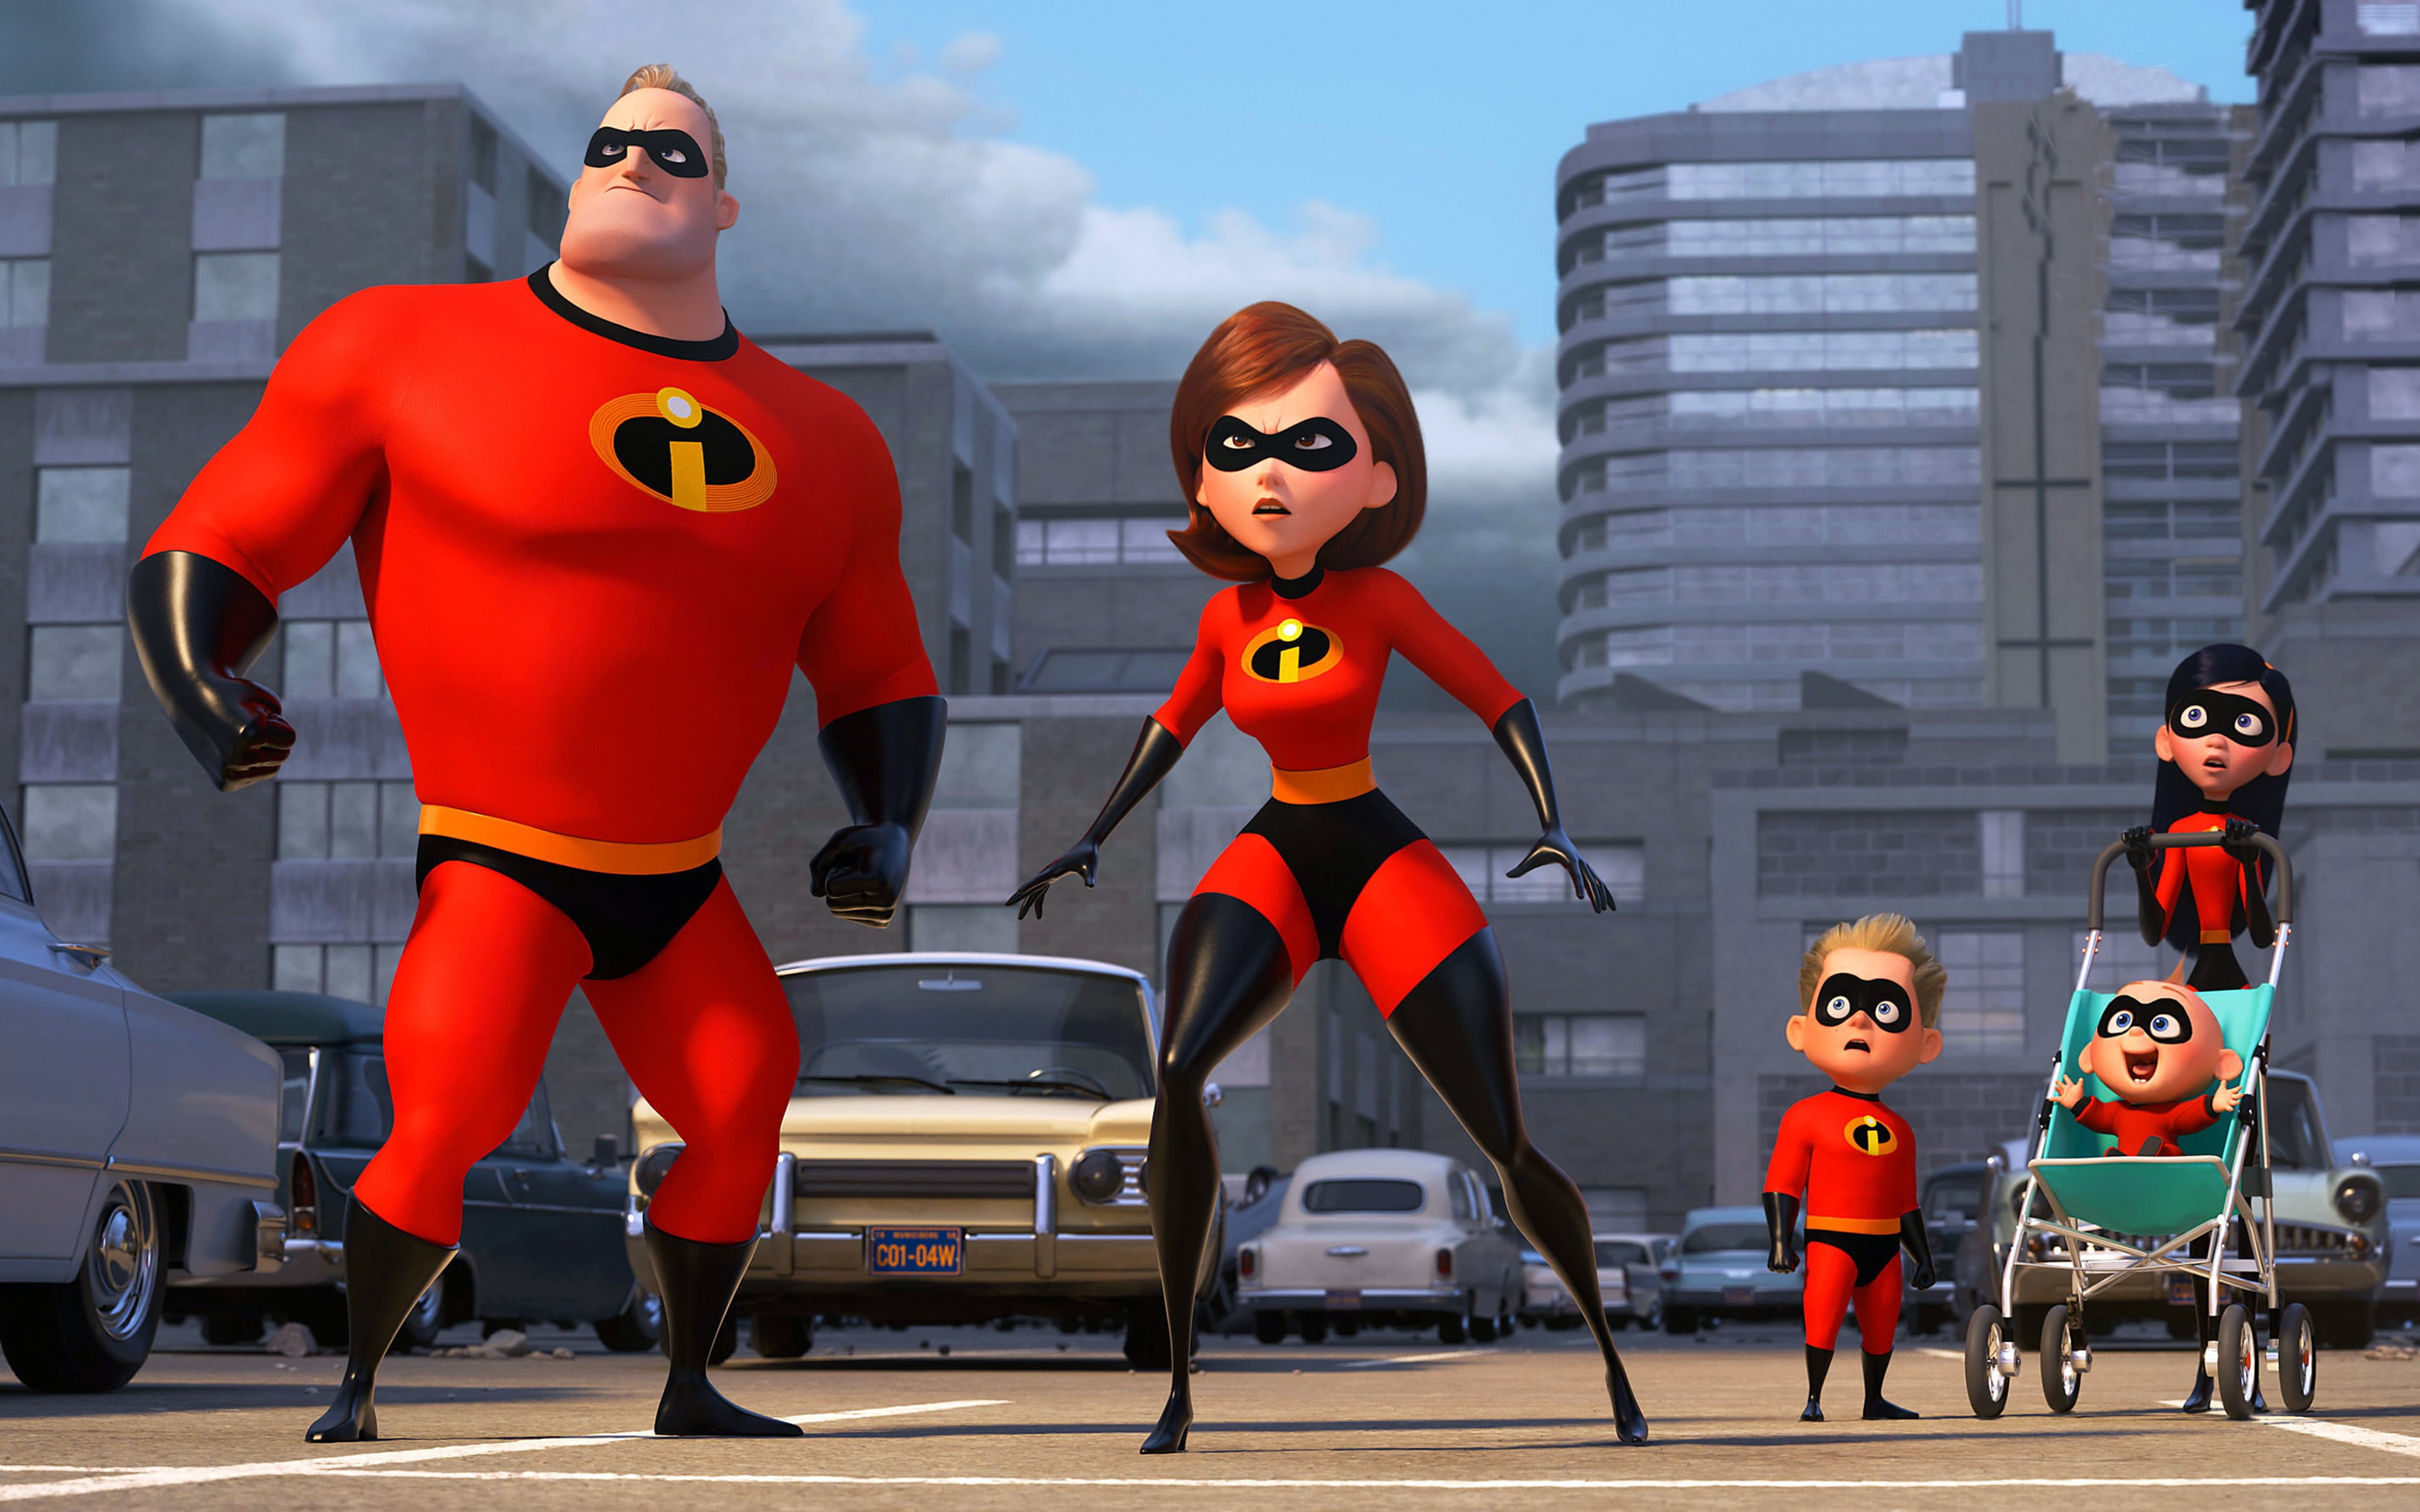 2018 The Incredibles 2 HD Film Poster, Disney The Incredibles II movie still screenshot